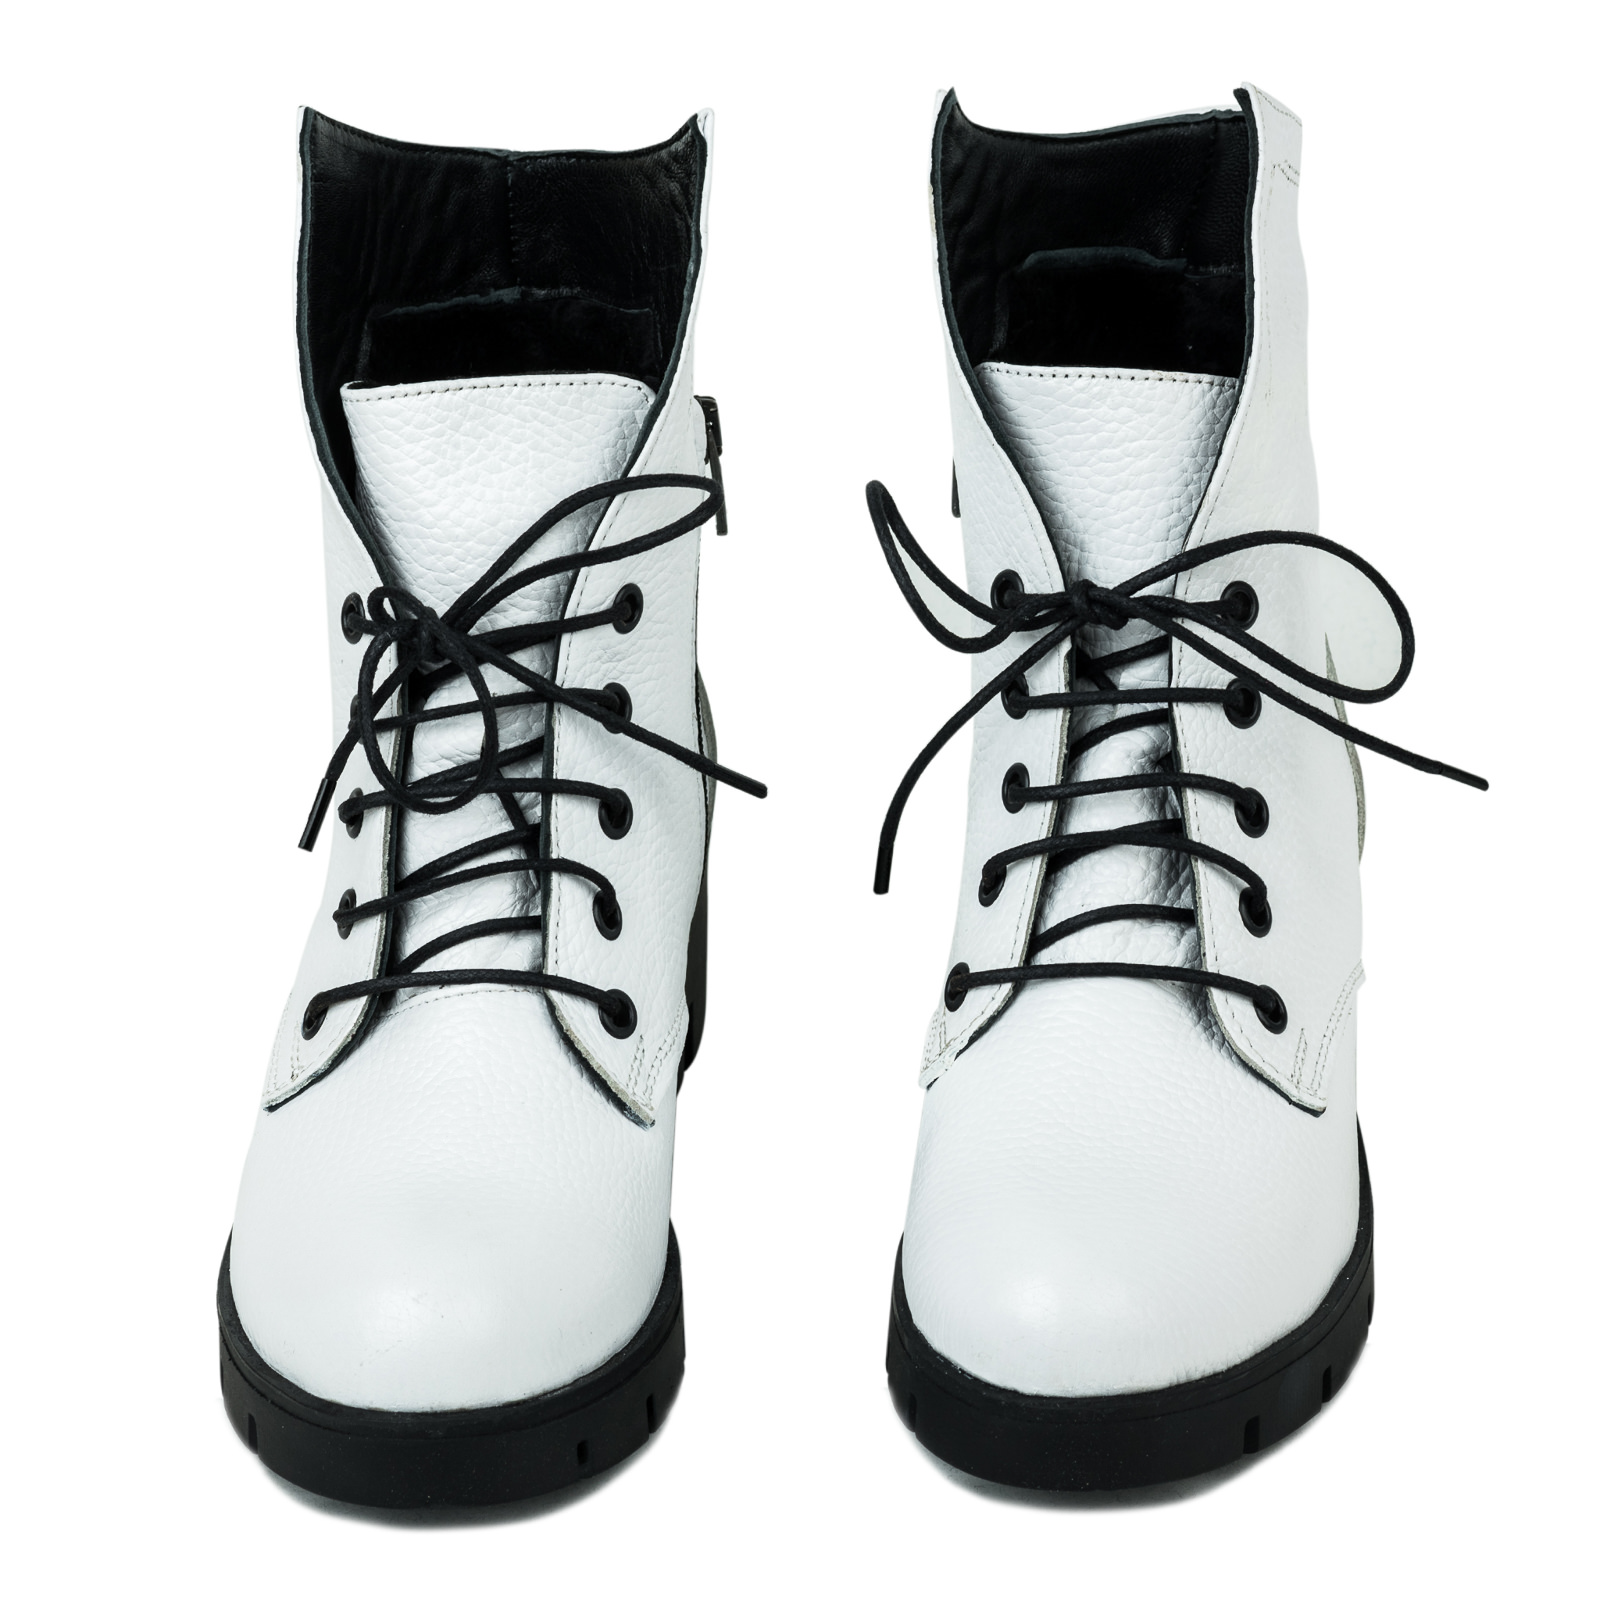 Leather ankle boots B055 - WHITE